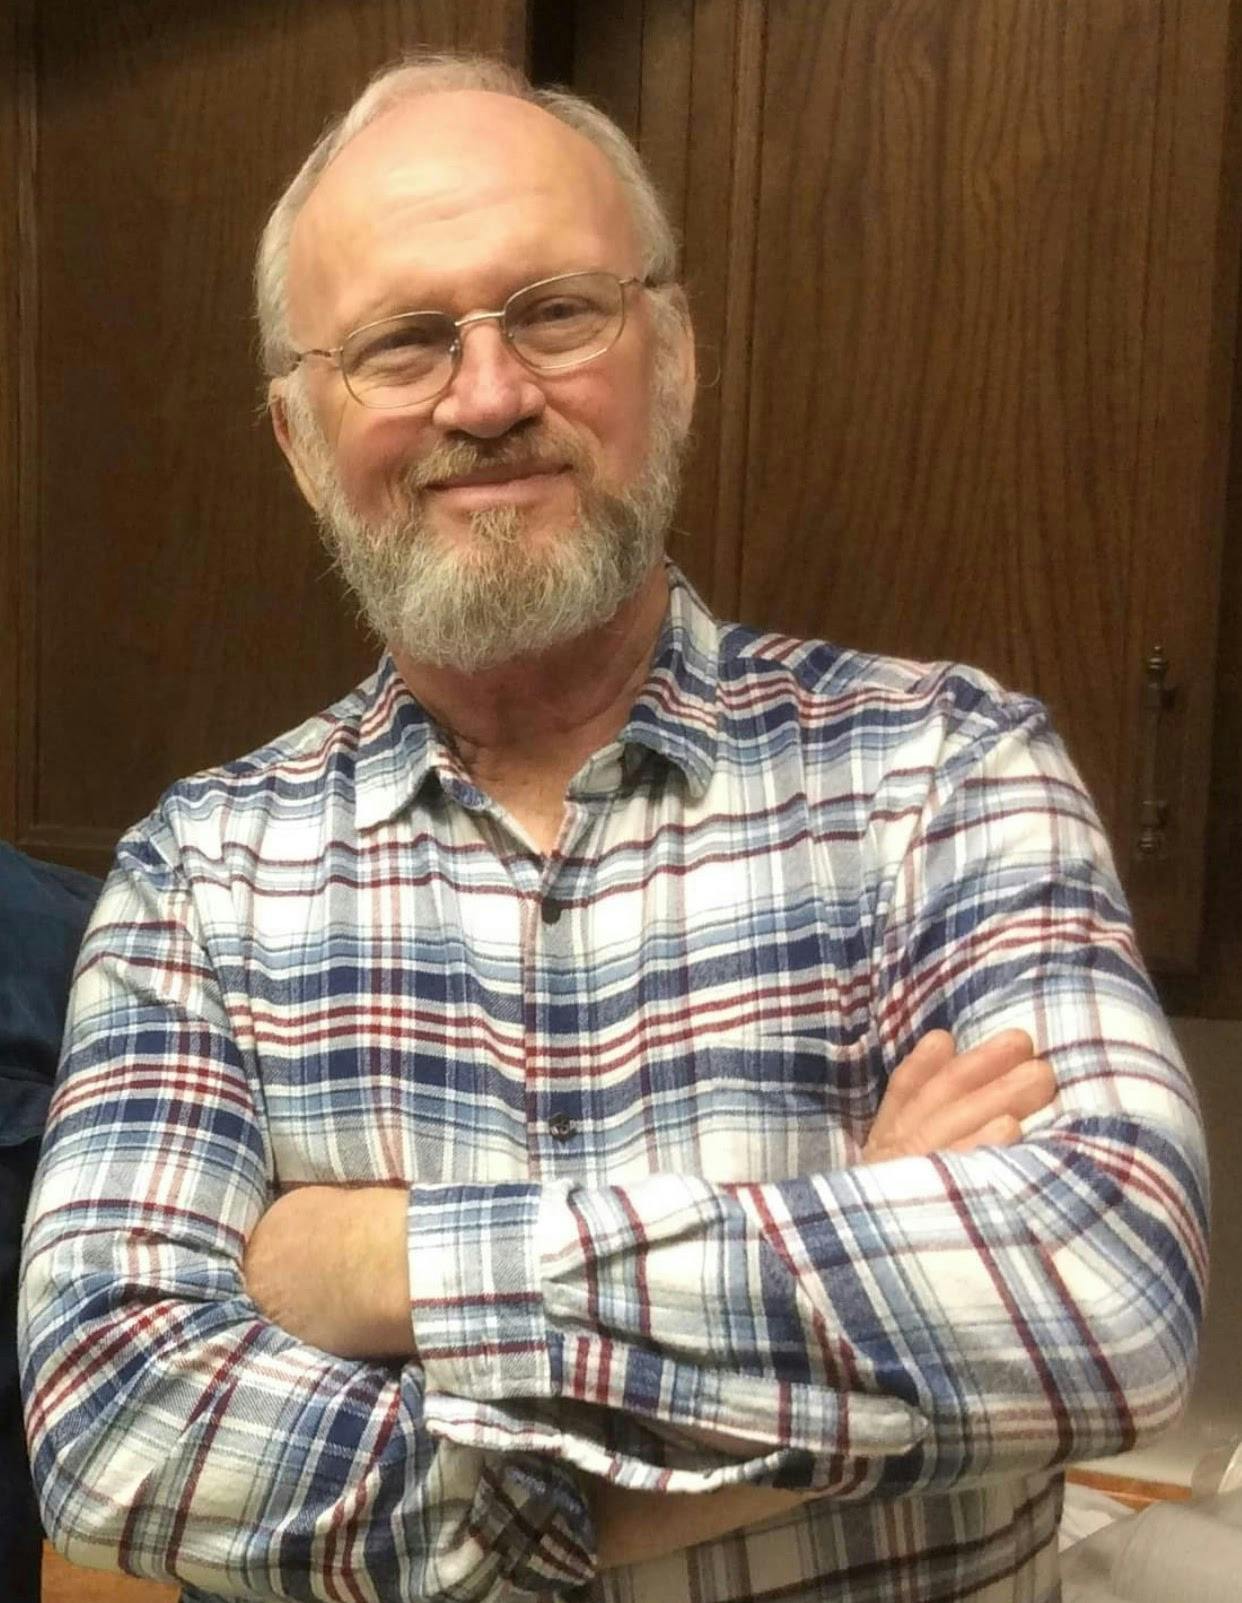 A photo of Joe Pursell, Board member and designer, standing with crossed arms and a plaid shirt.